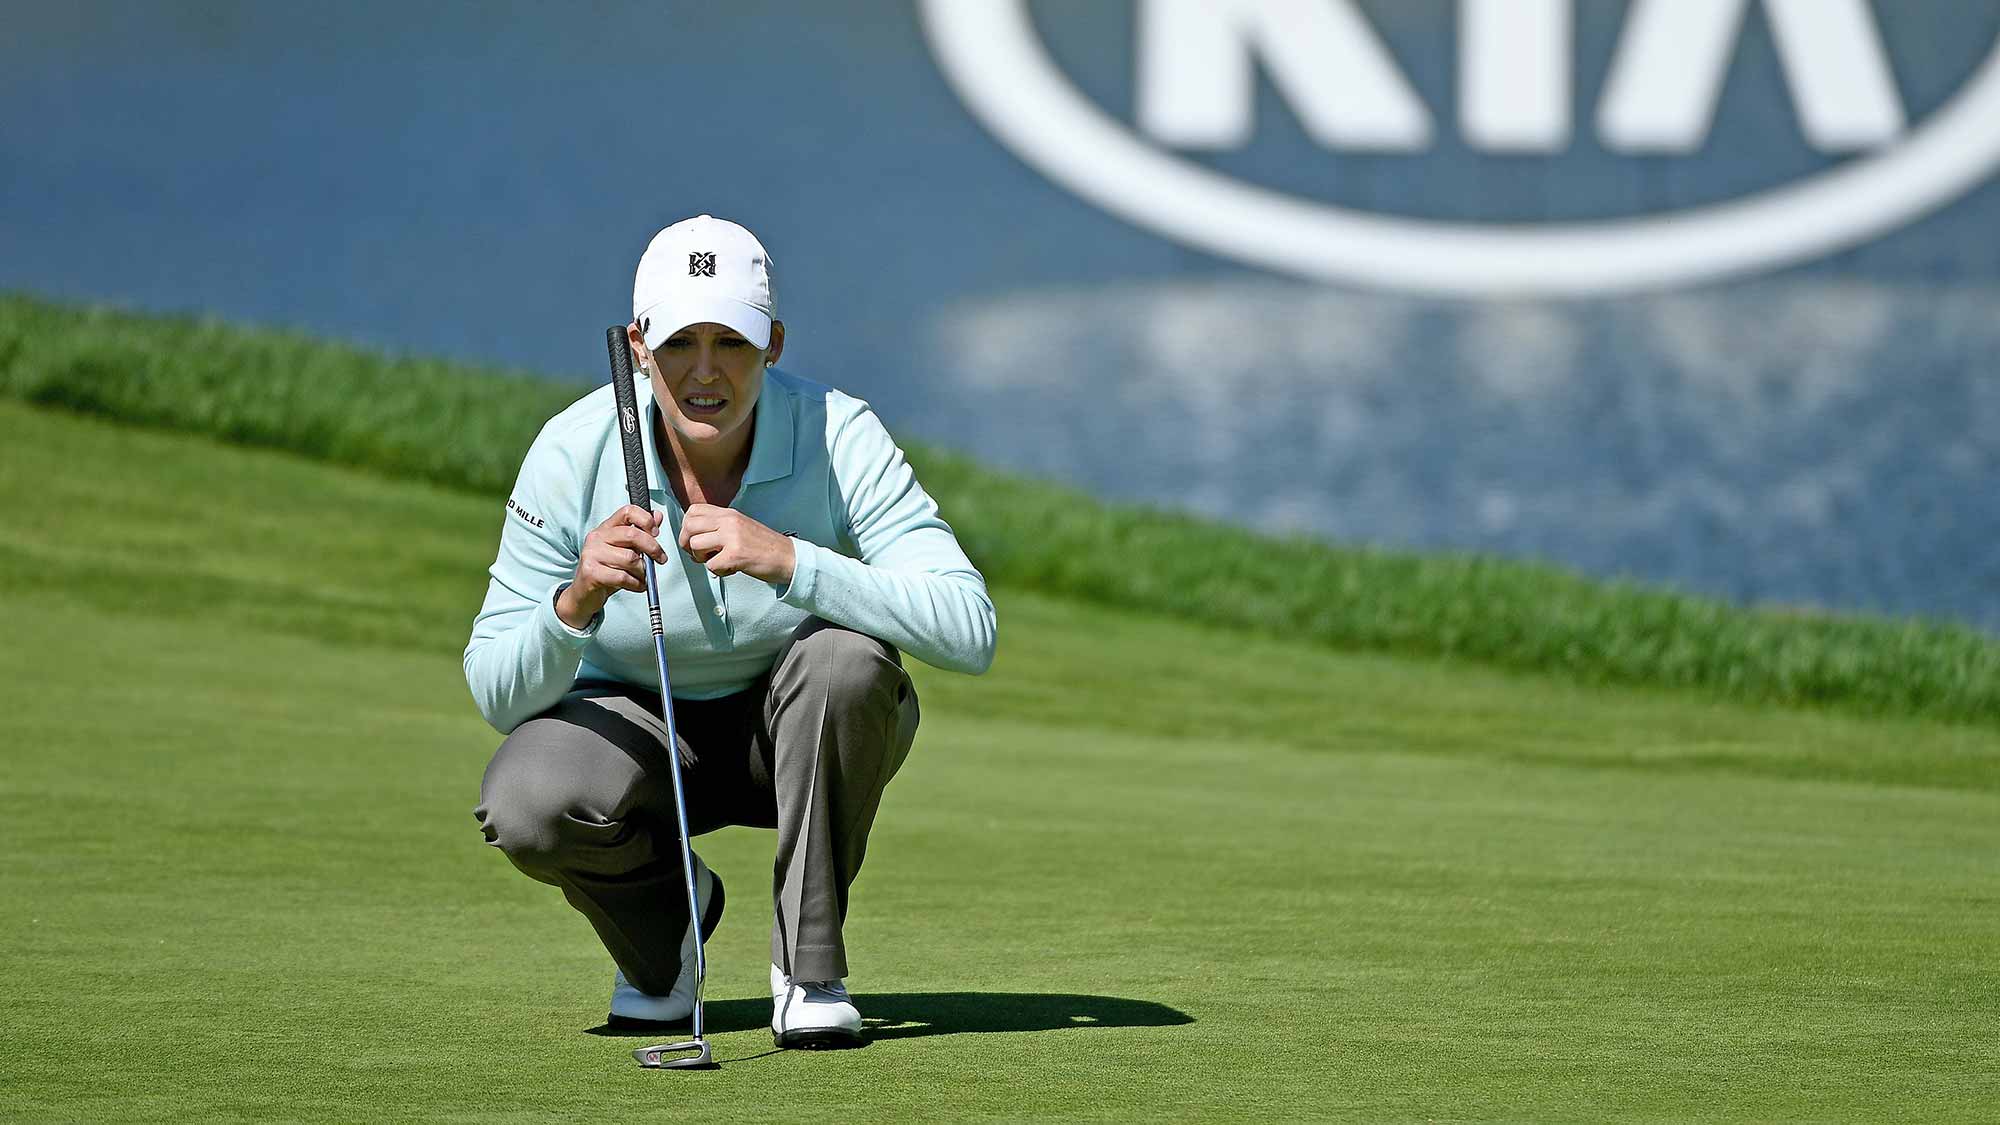 Cristie Kerr lines up her putt on the 16th green during the 2nd Round of the KIA Classic at the Park Hyatt Aviara Resort